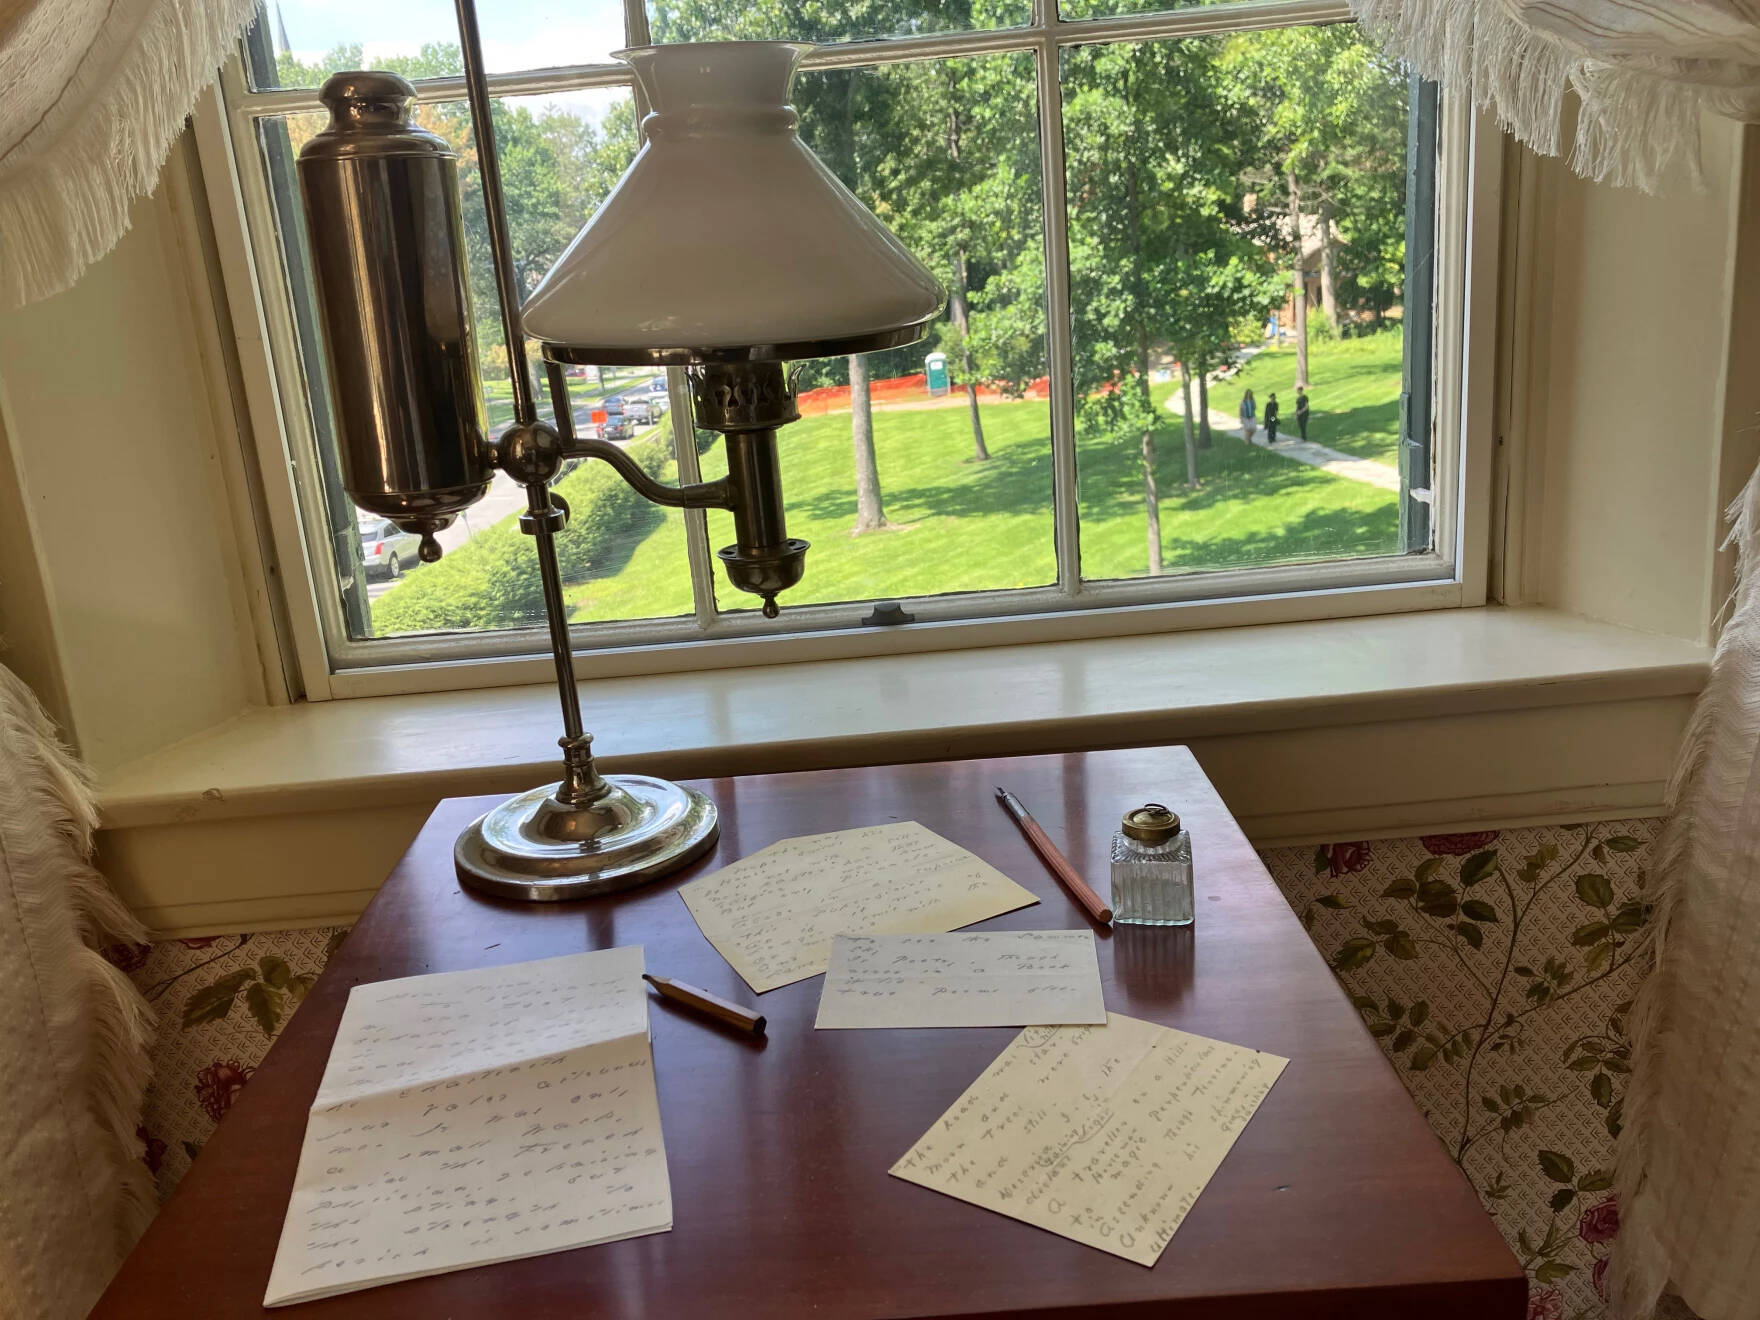 A replica of the small table in the Emily Dickinson Museum In Amherst, Massachusetts, where Dickinson wrote poems and letters. (Nancy Eve Cohen/NEPM)